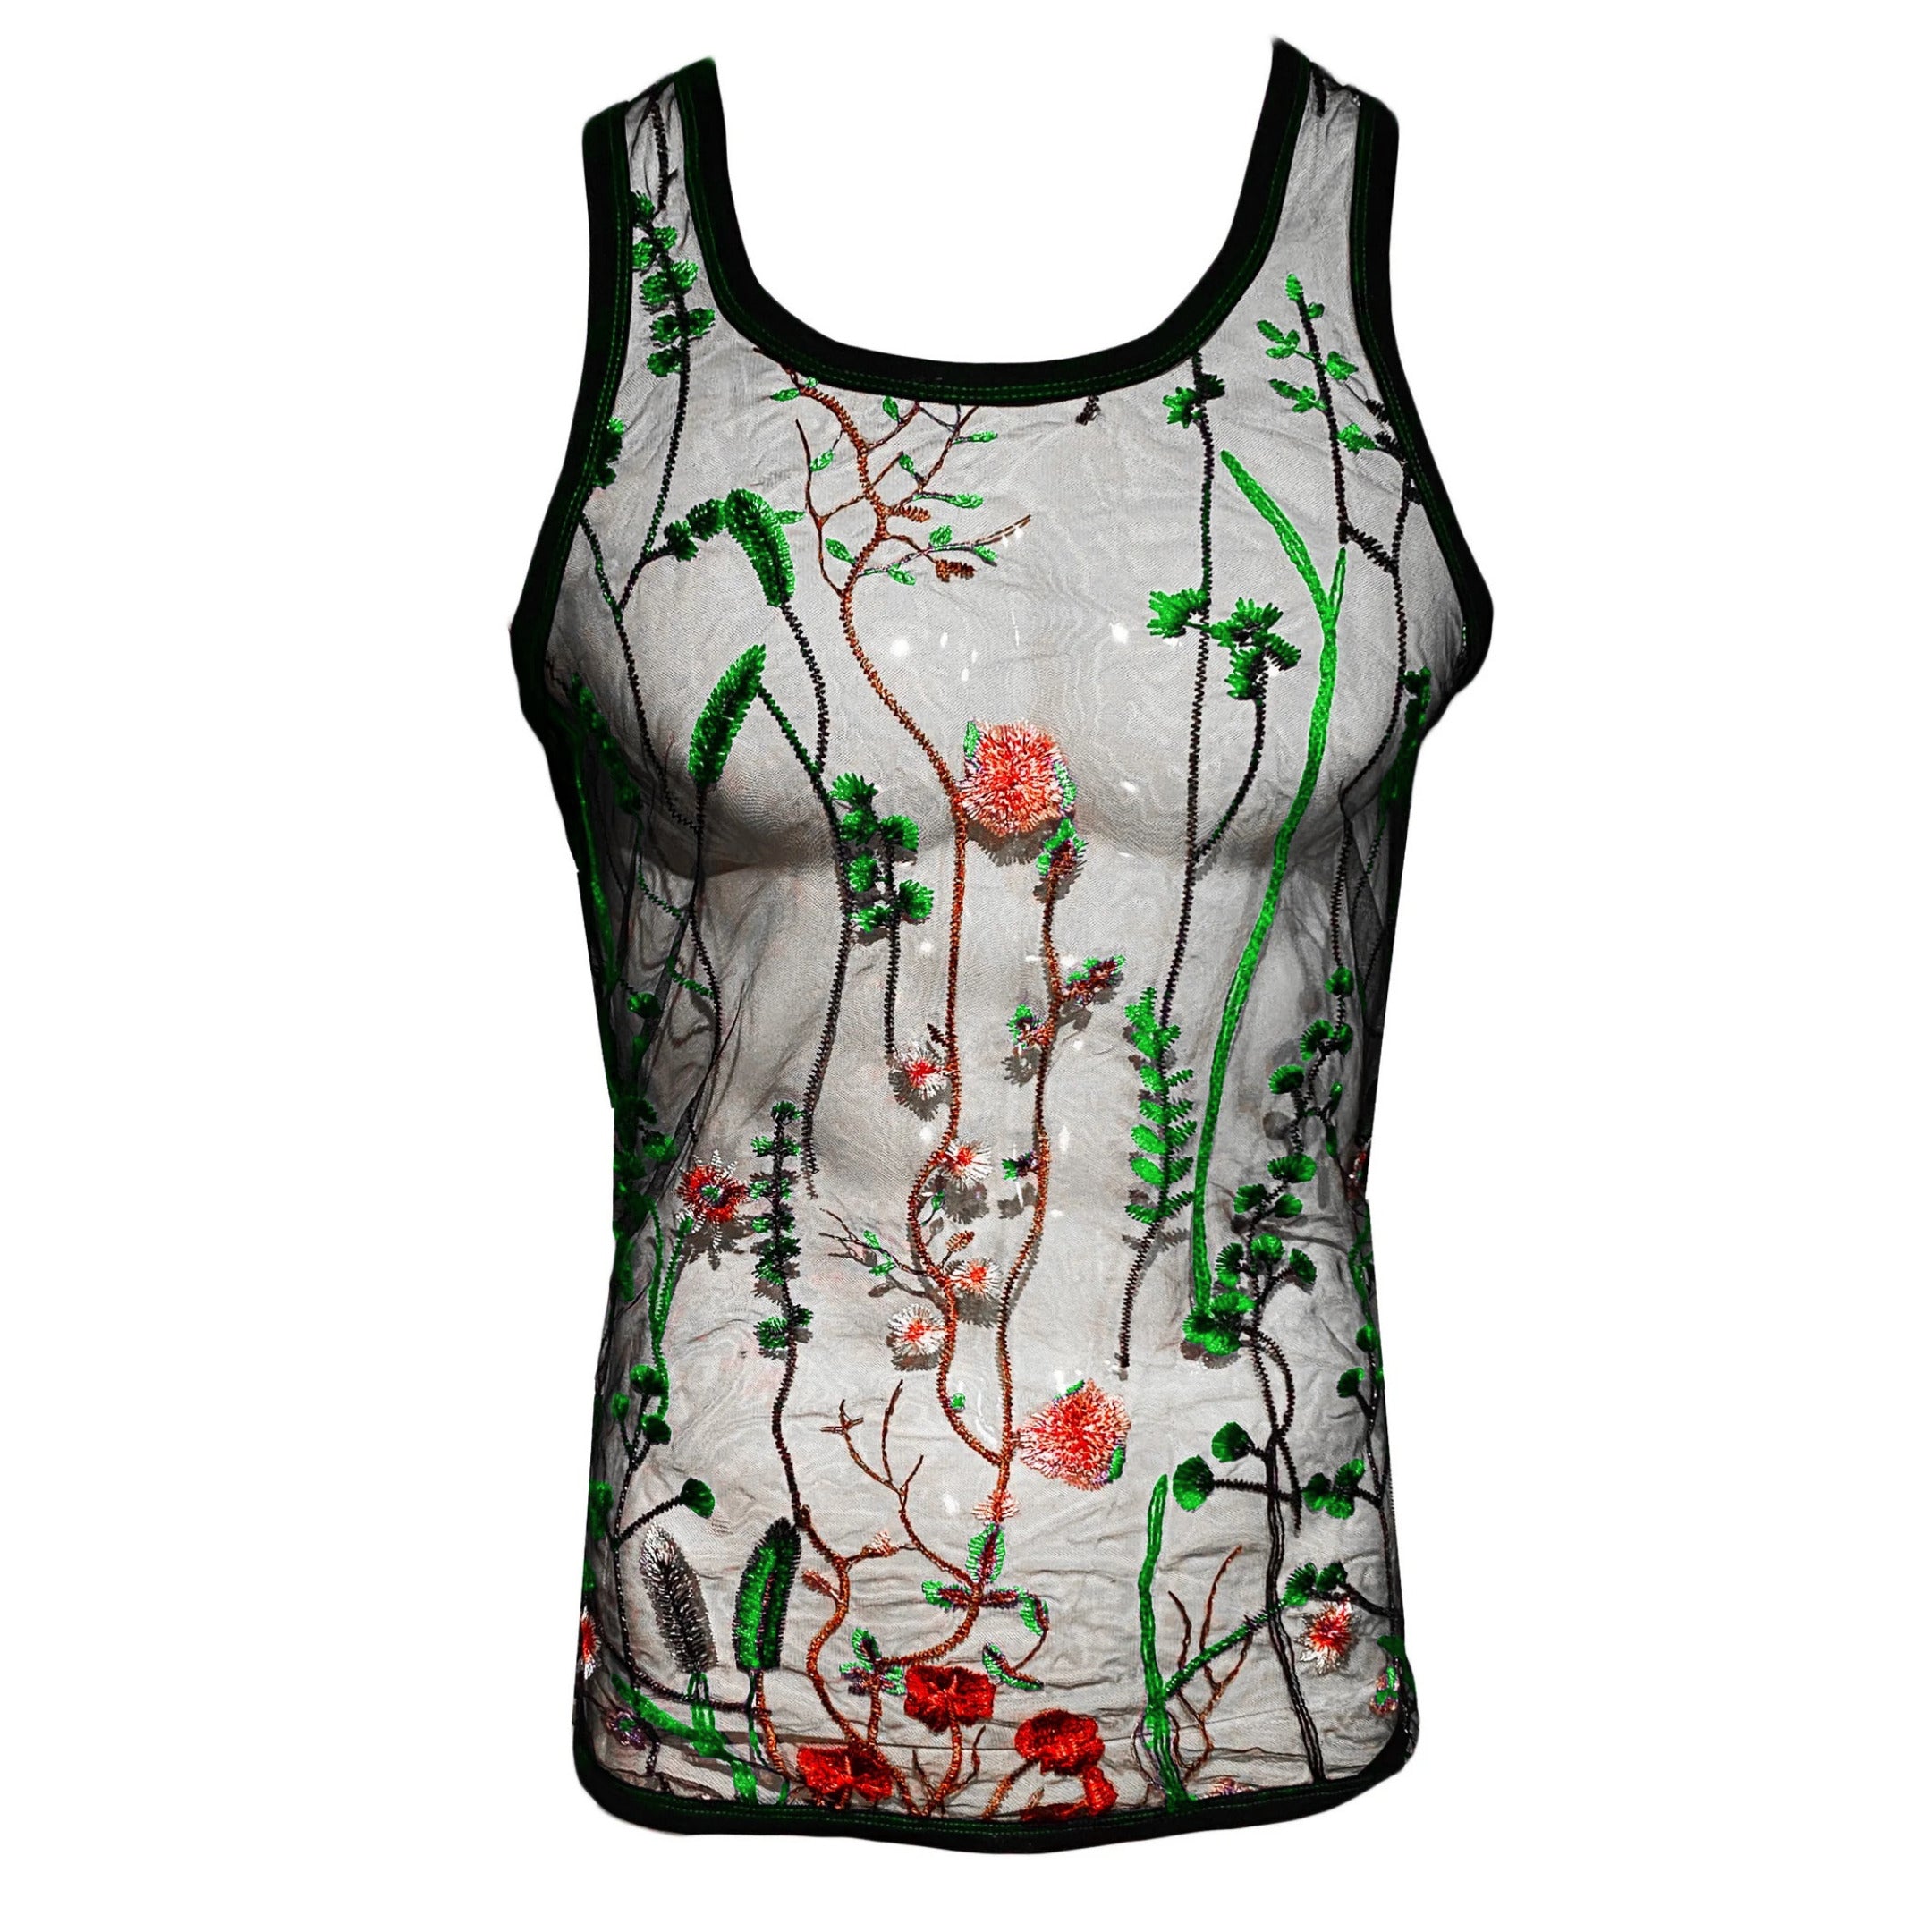 Knobs Embroidered green floral tank mesh black